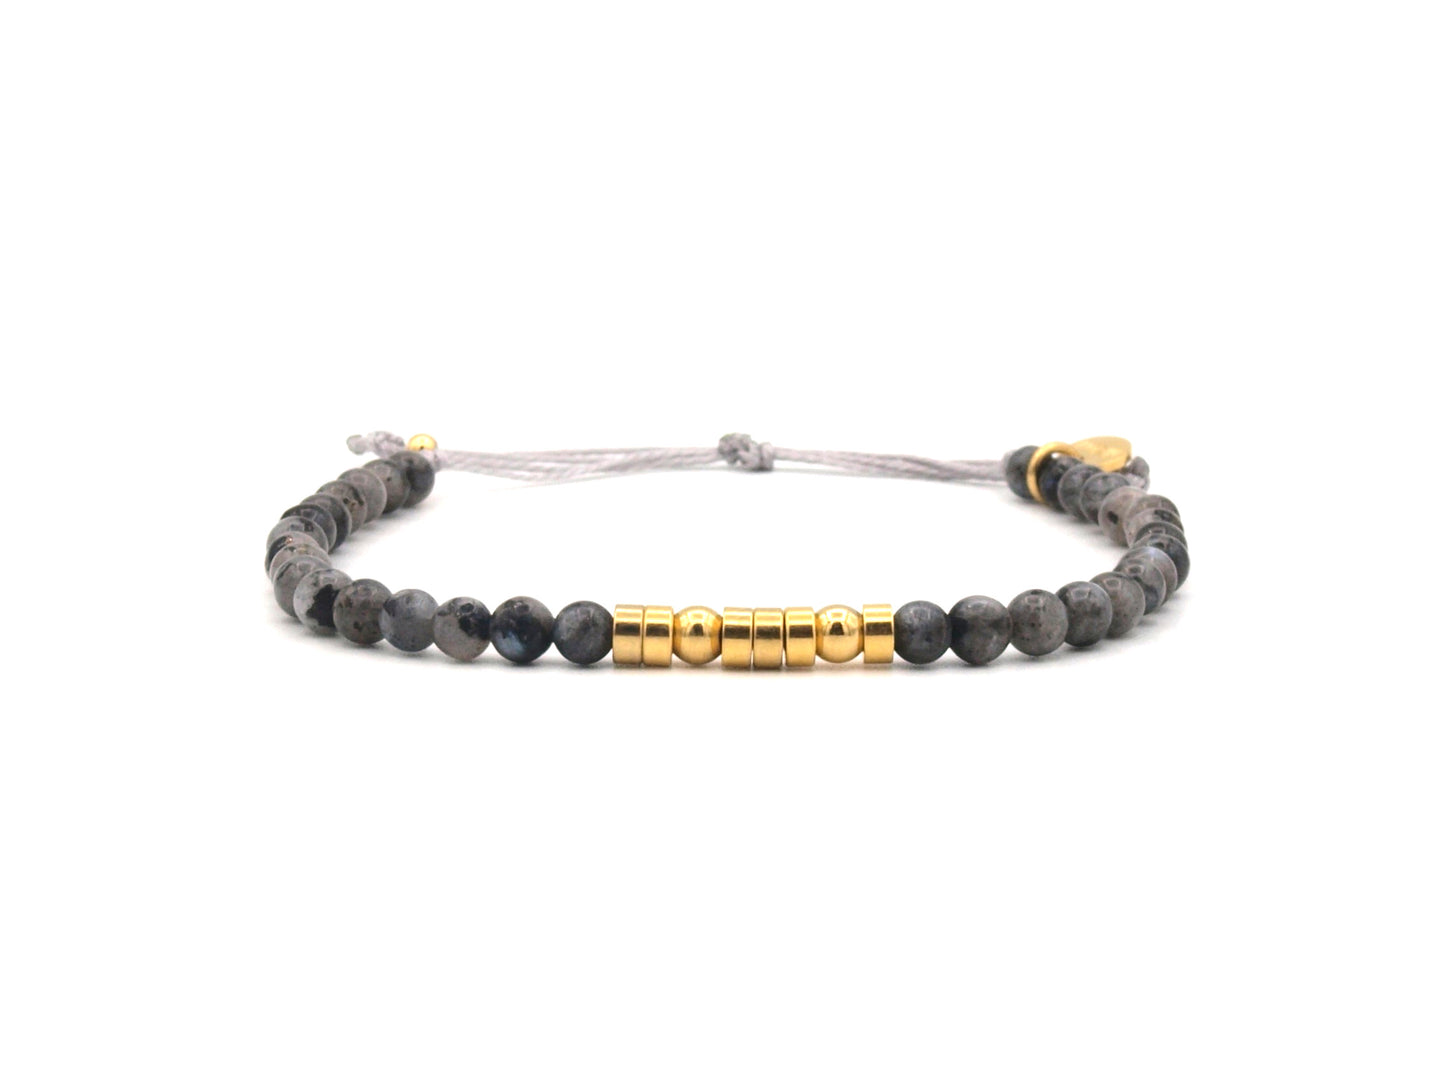 Personalized morse code bracelet, larvikite and stainless steel